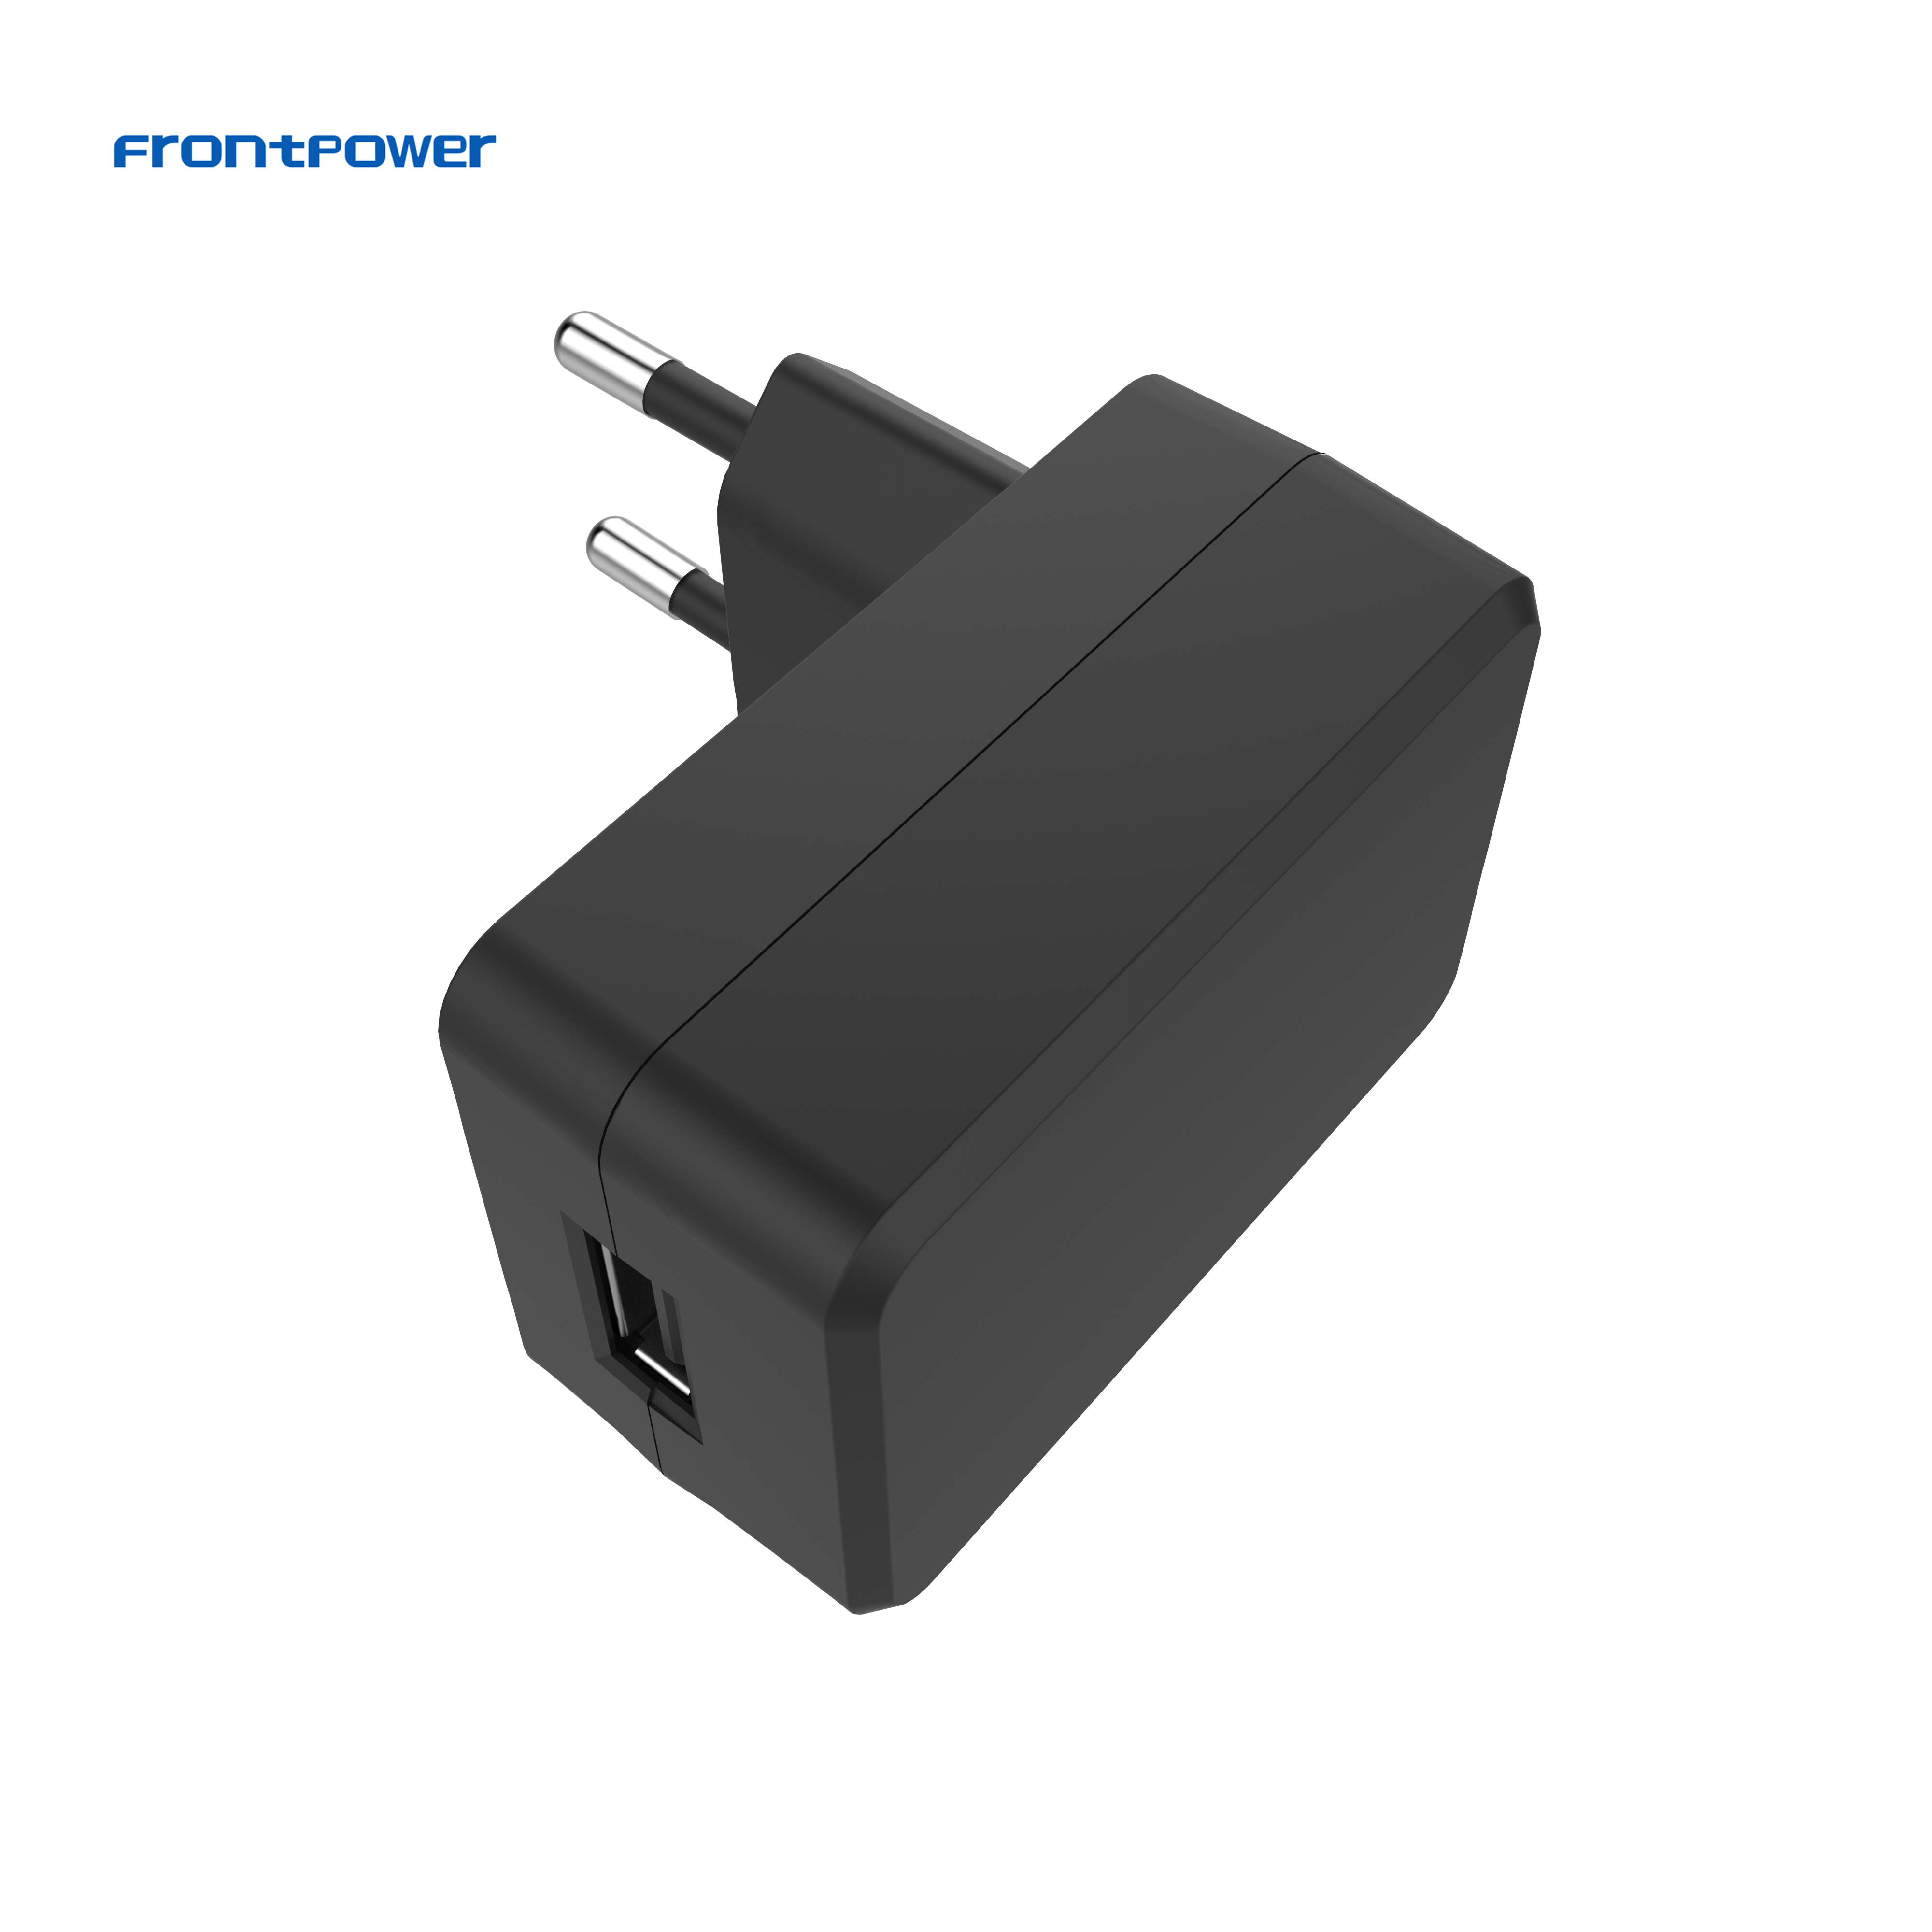 Frontpower kc power adaptor 5V 2A KR plug power supply USB adapter for LED device